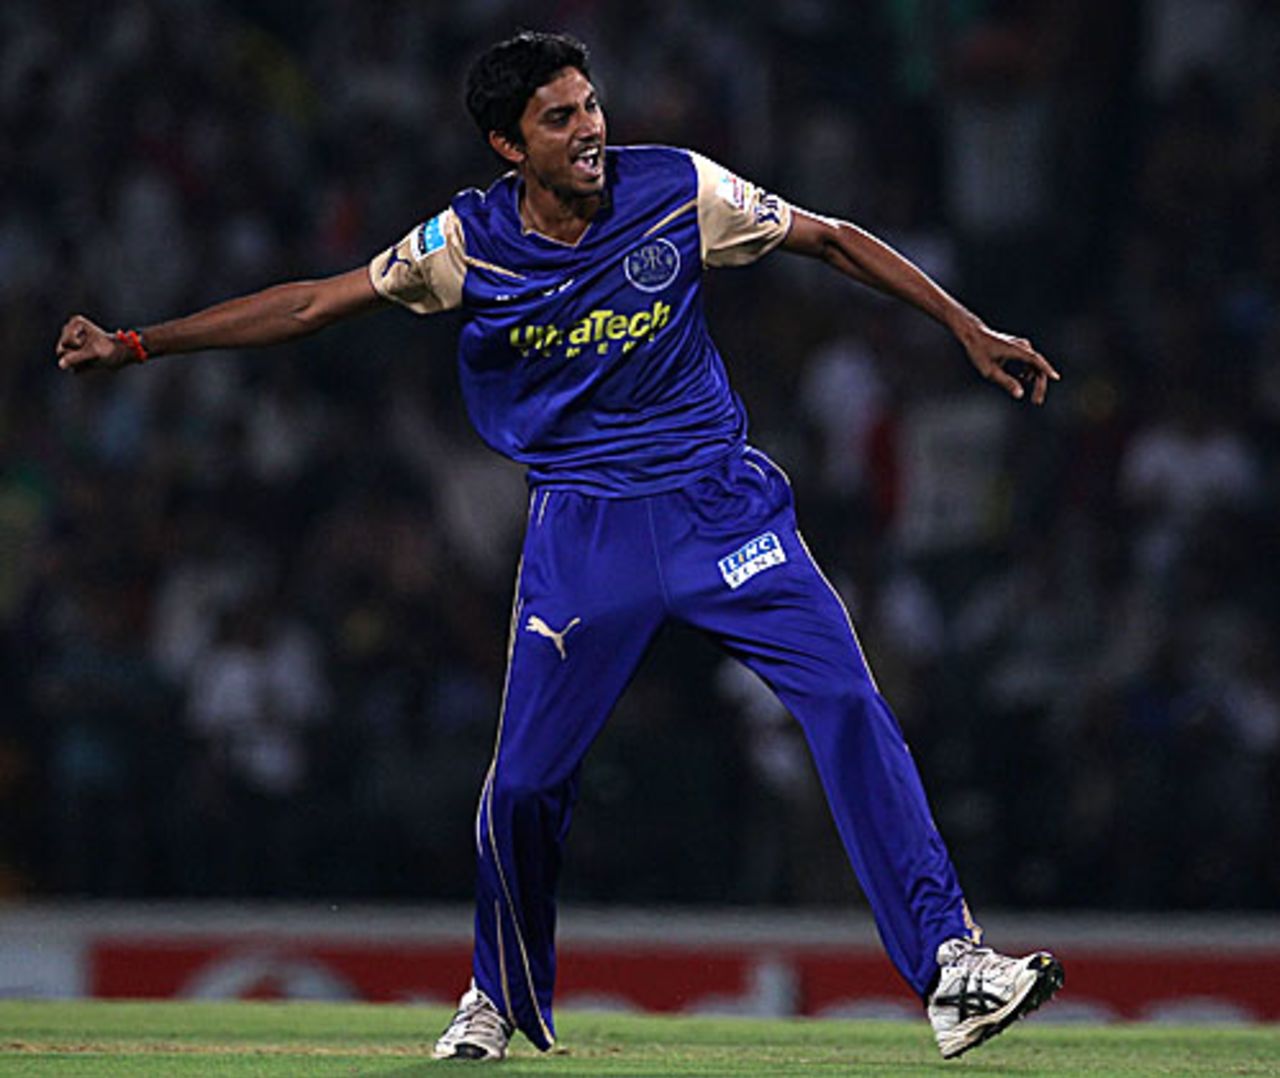 Siddharth Trivedi bowled a terrific last over to turn the tables on Deccan, Deccan Chargers v Rajasthan Royals, IPL 2010, Nagpur, April 5, 2010